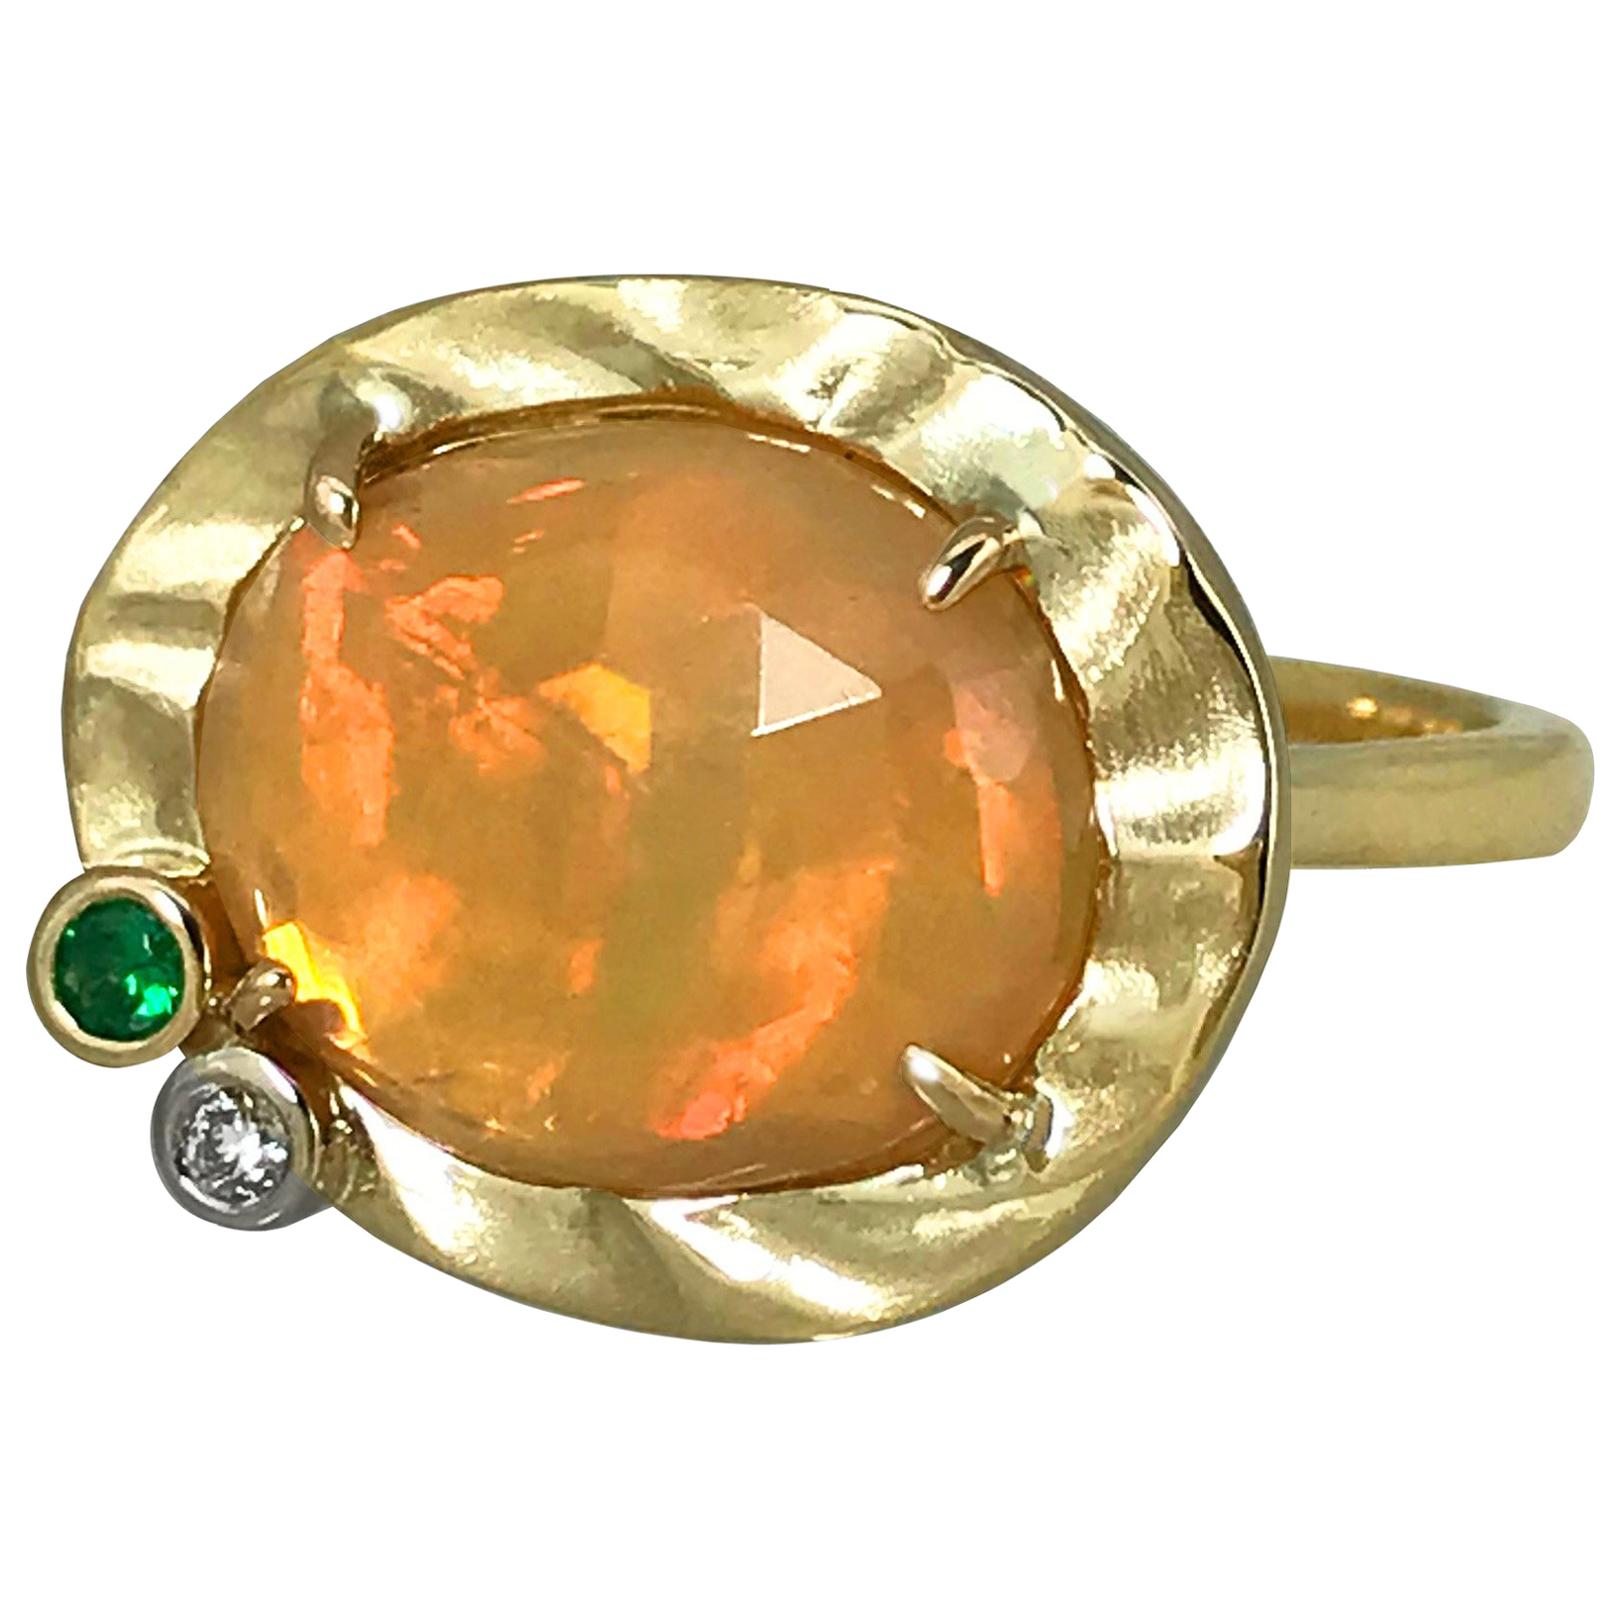 Orange Opal with Green Garnet and Diamond Accents 14 Karat Gold Cocktail Ring